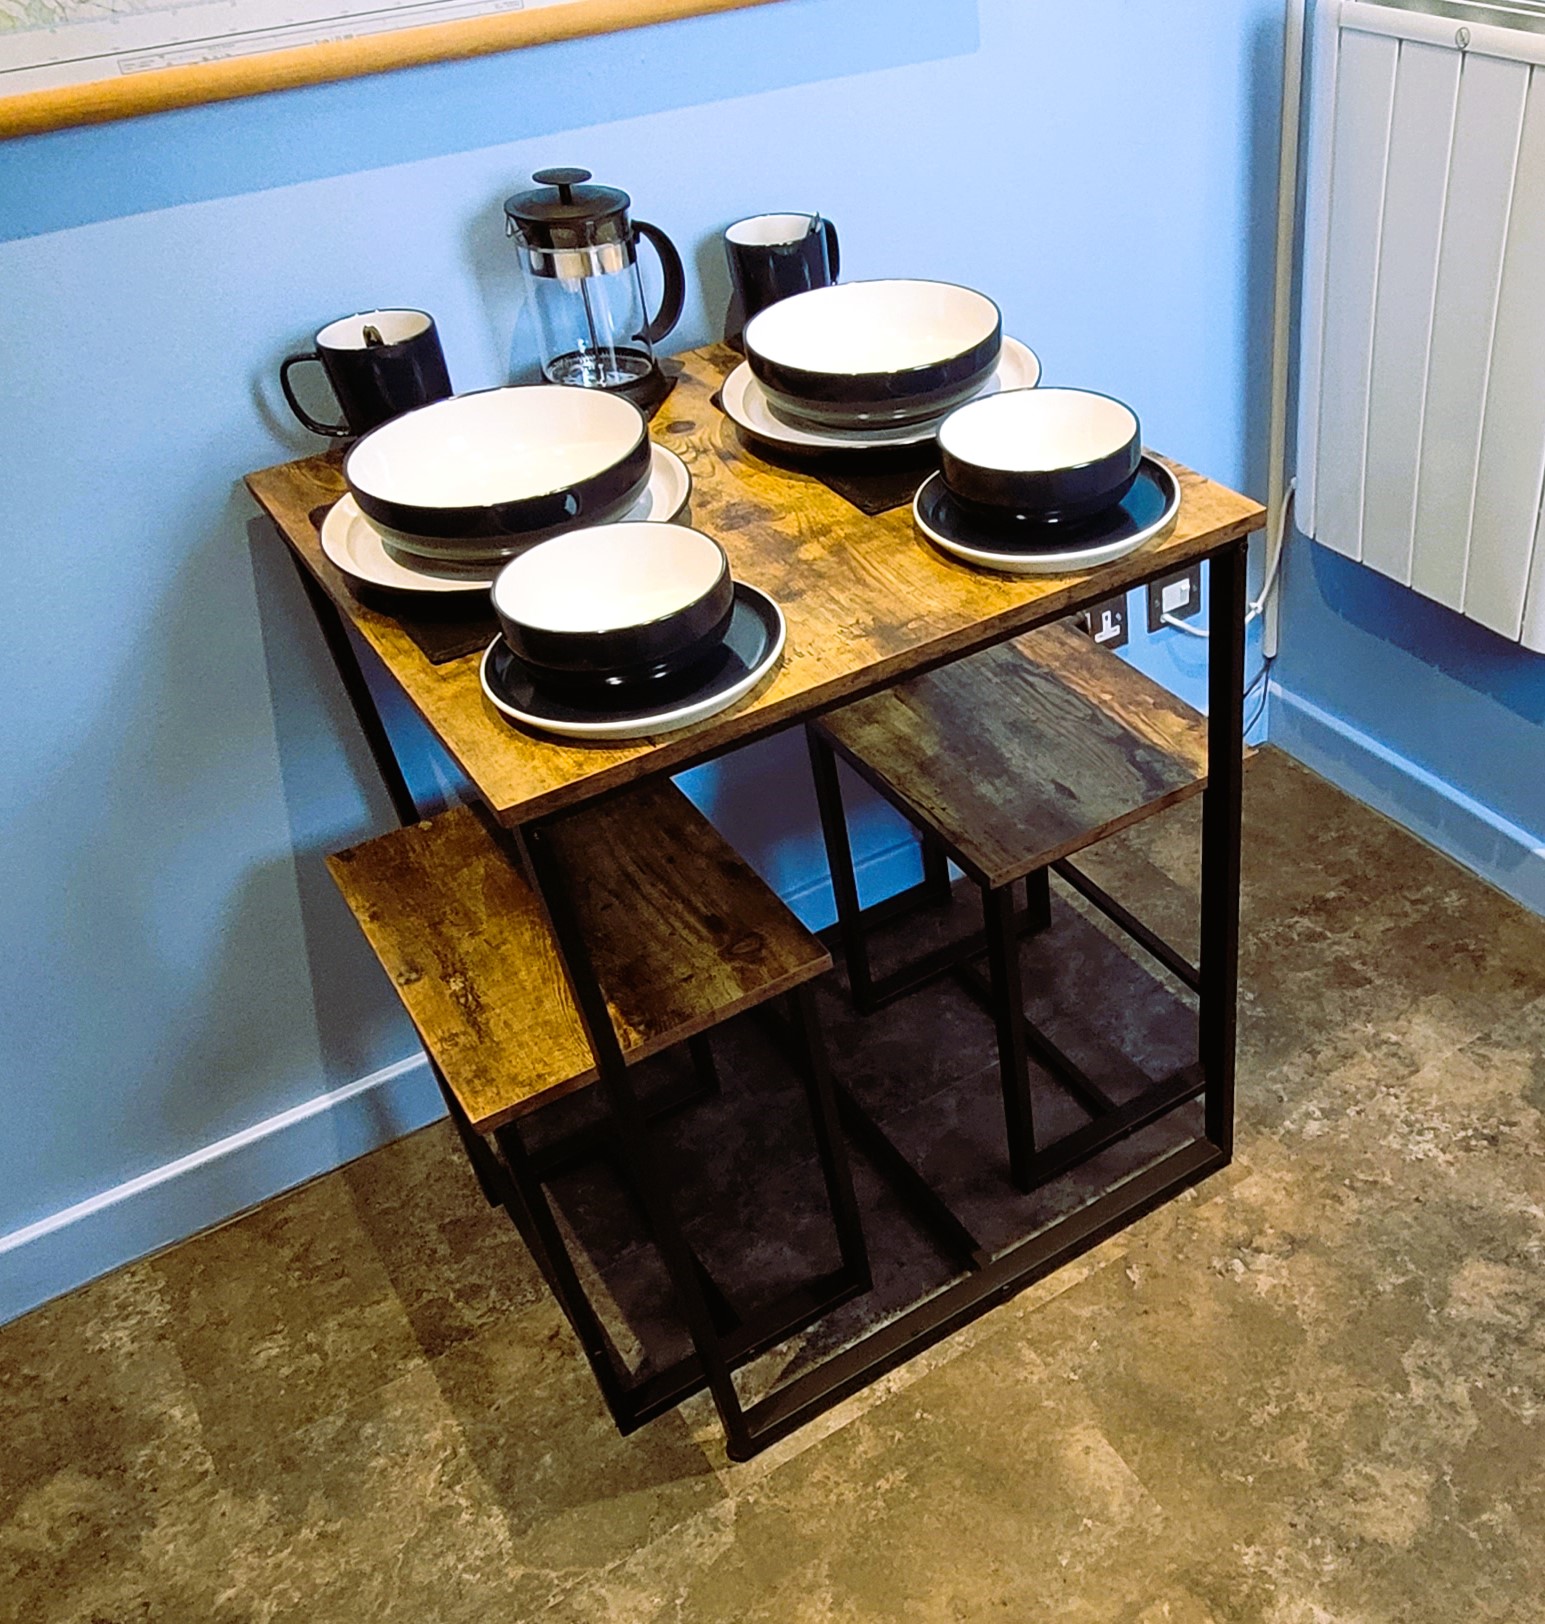 Enjoy your breakfast, lunch or supper in the comfortable kitchinette with seating for two